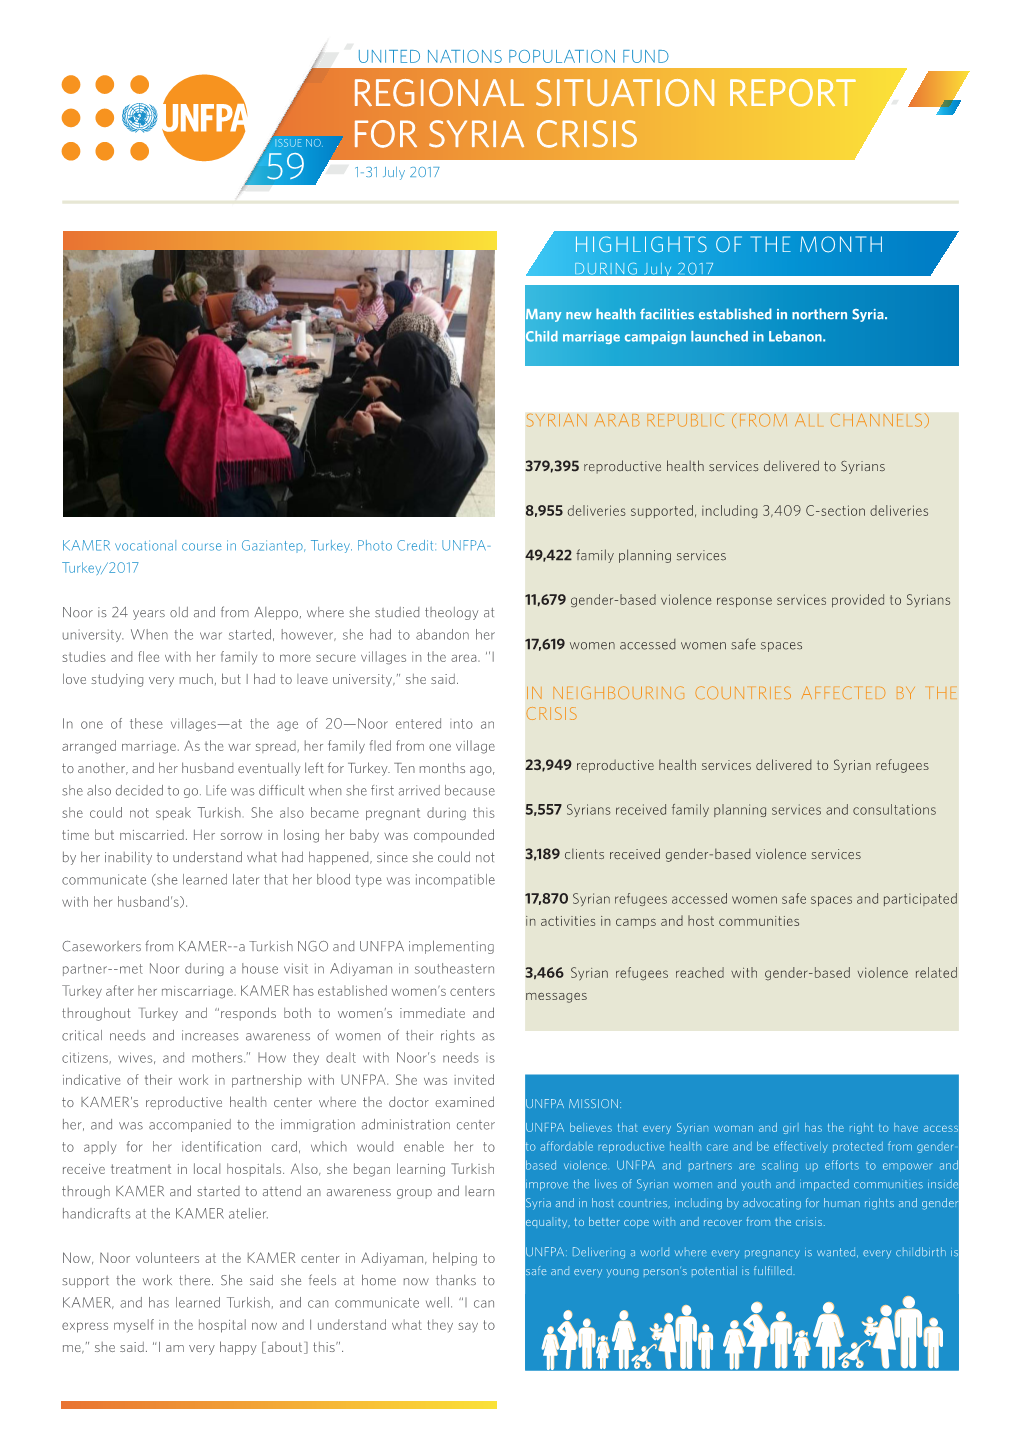 59 Regional Situation Report for Syria Crisis